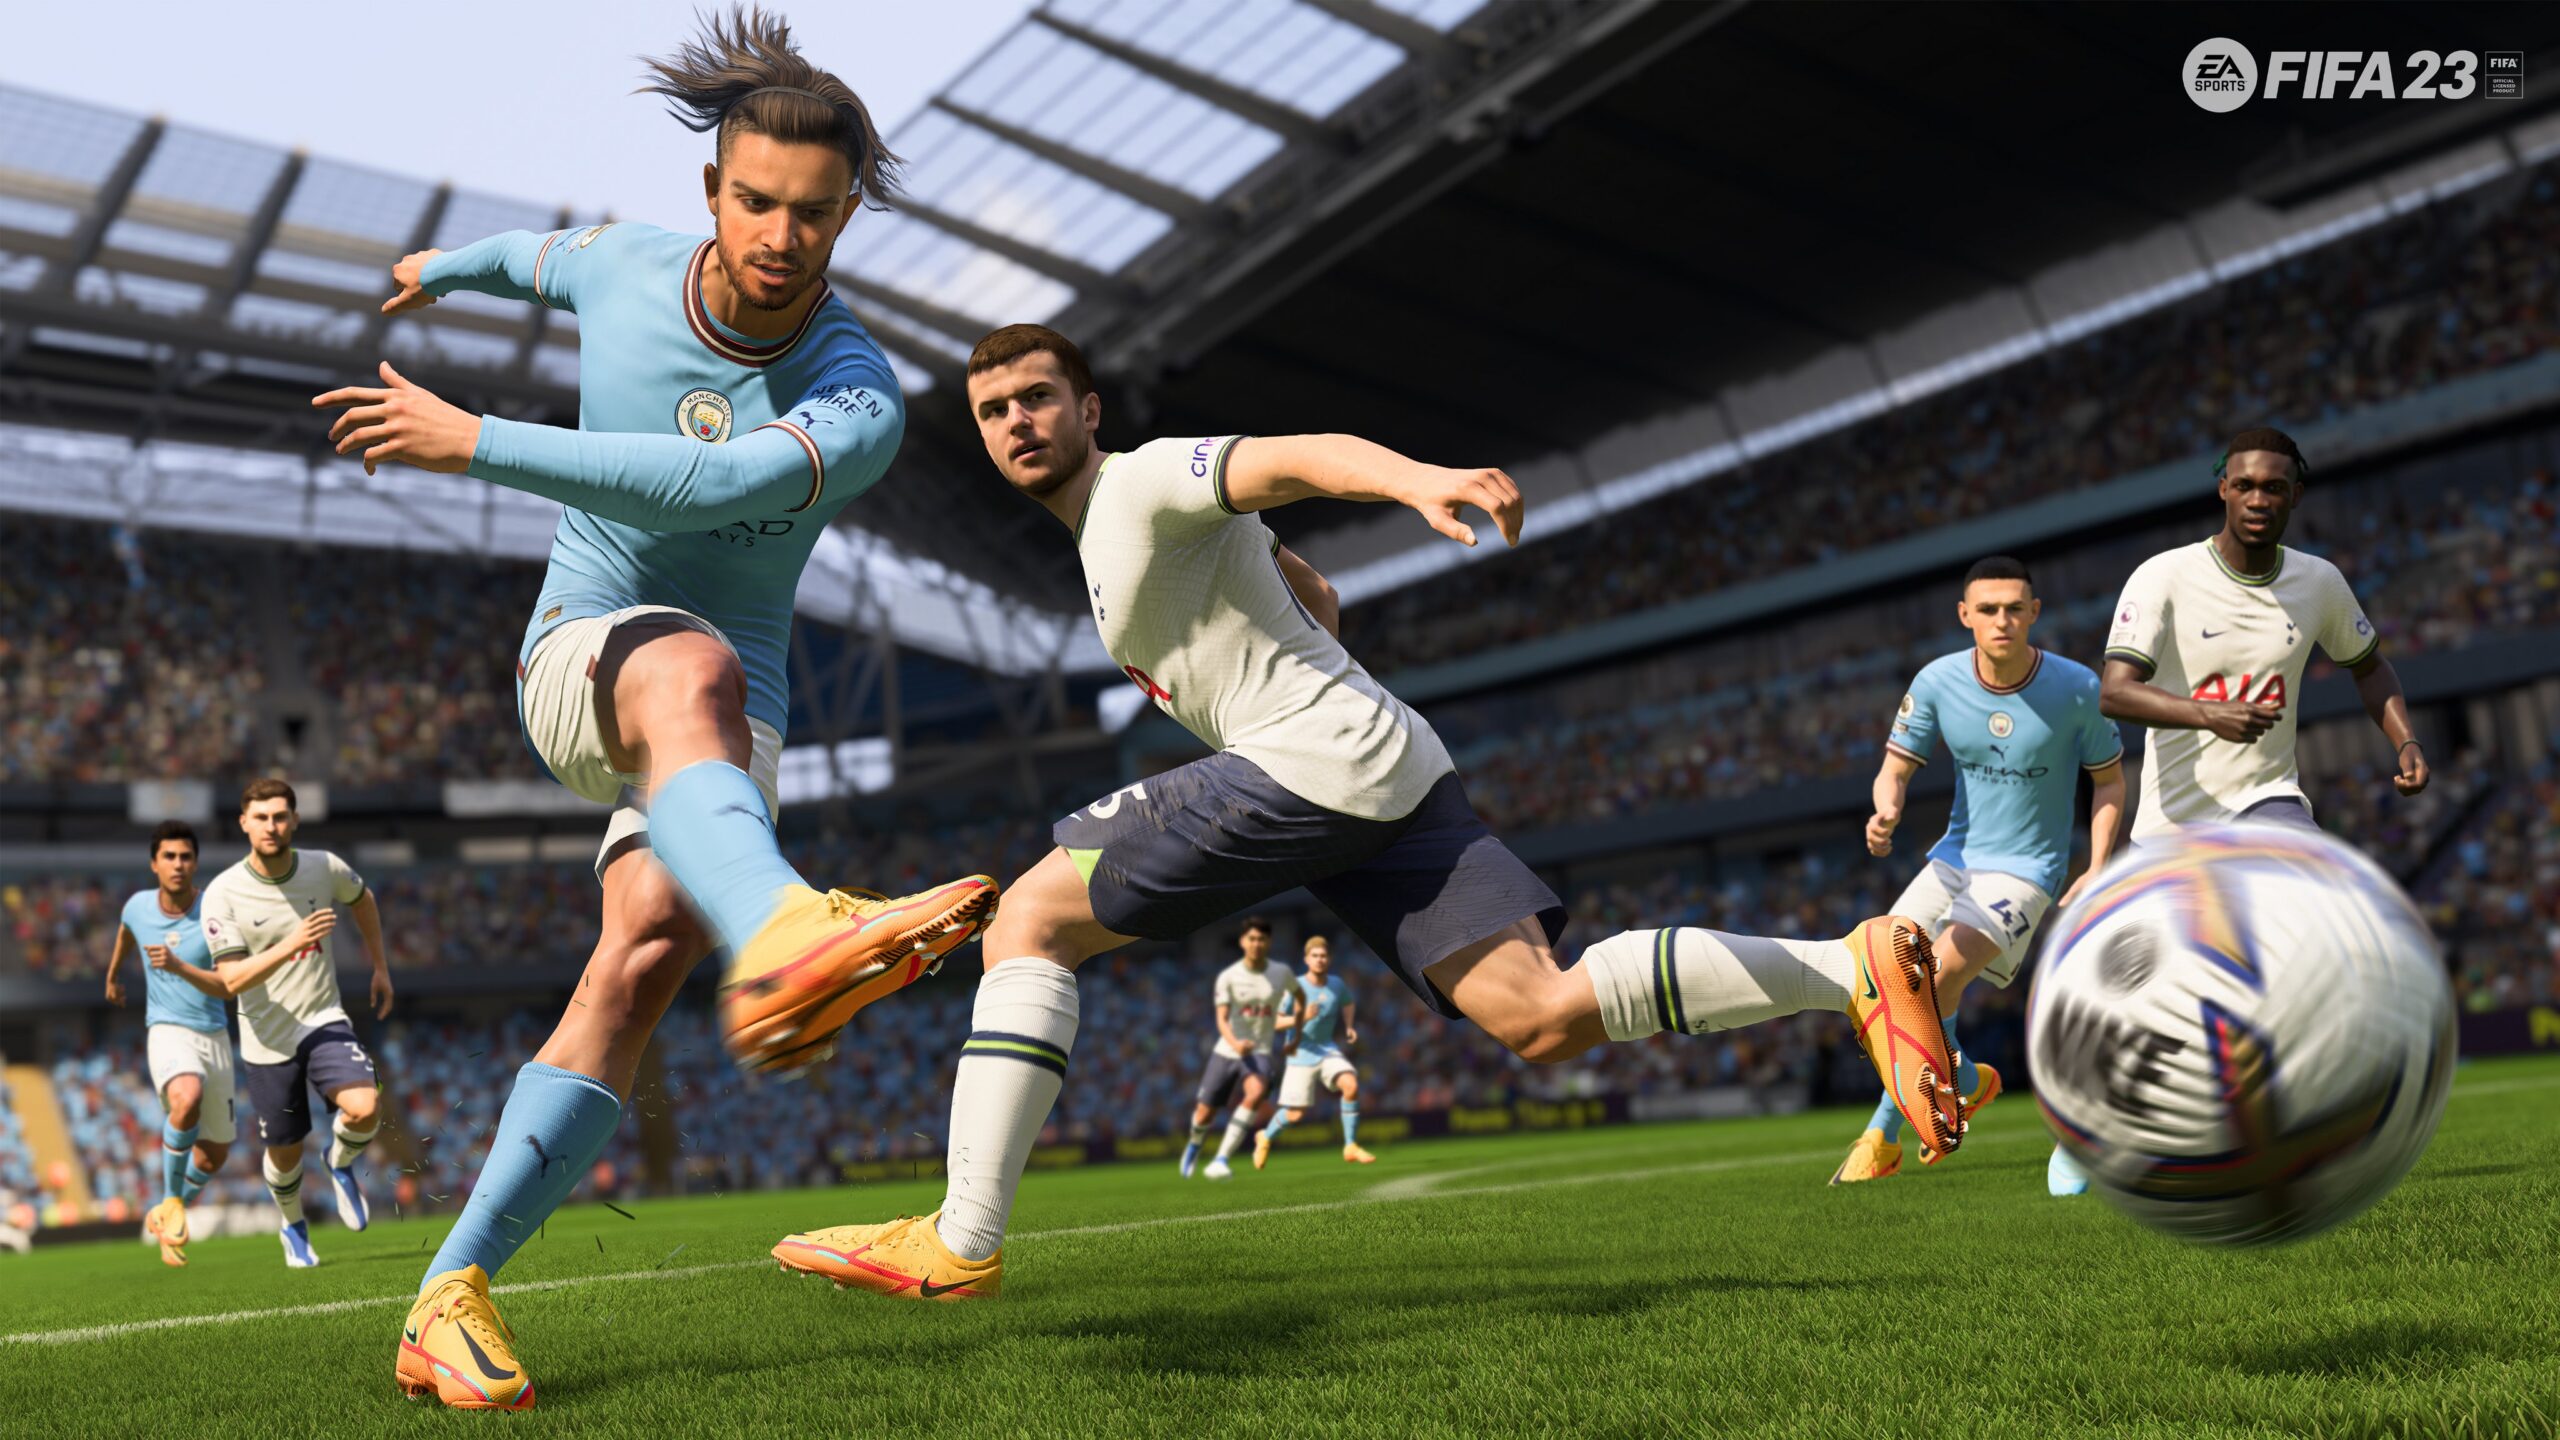 How Did FIFA 23 Perform As An ESports Game? FIFA Infinity